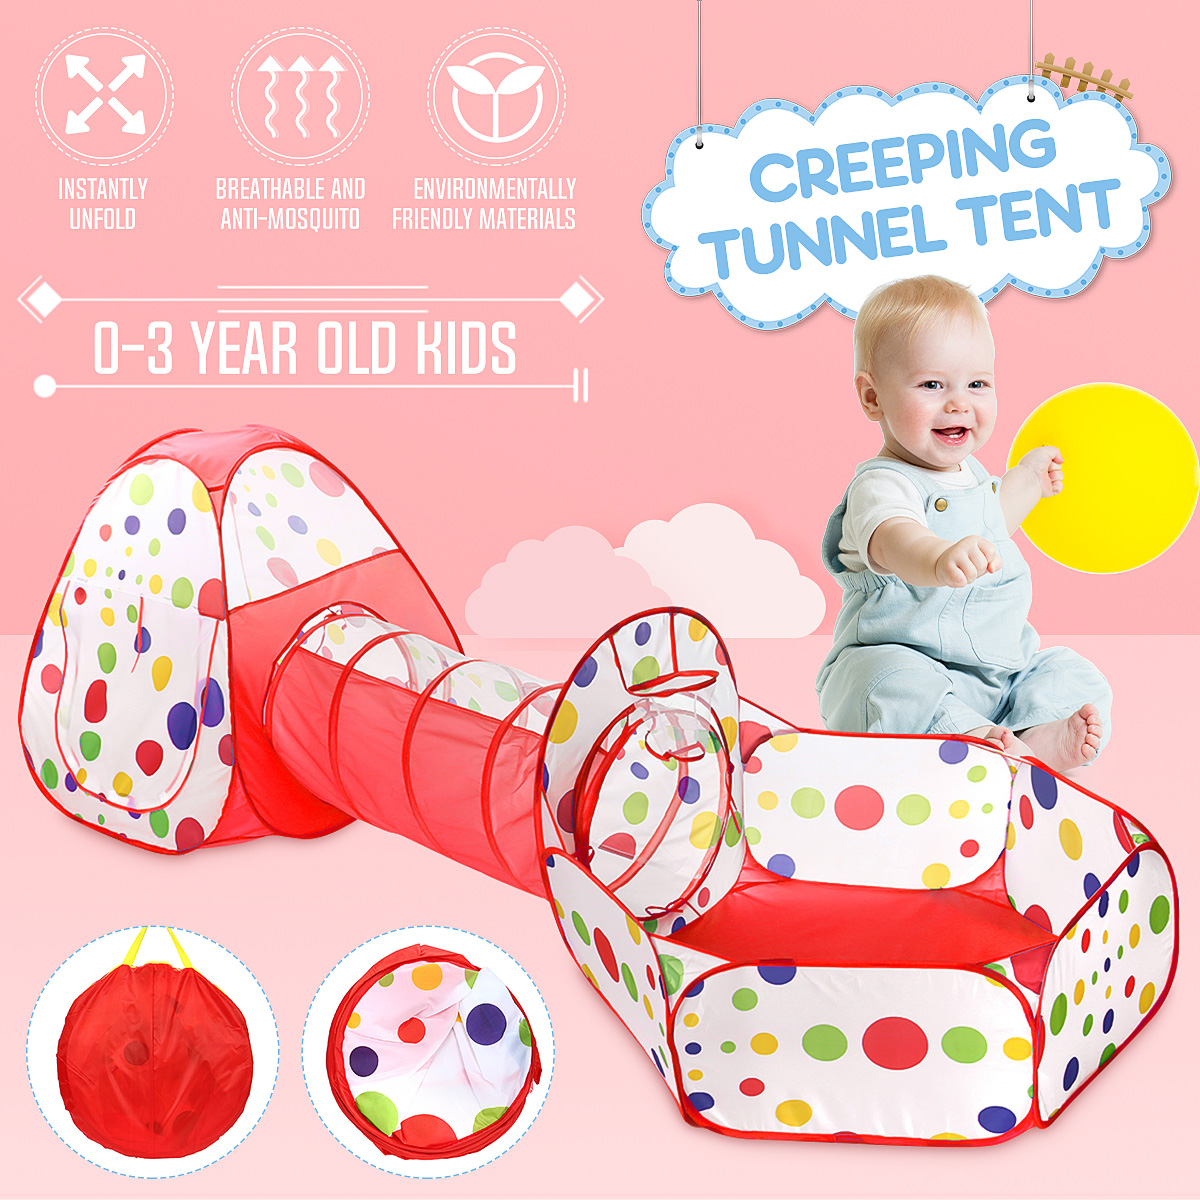 Baby-Creeping-Tunnel-Tent-Play-Game-Toys-for-0-3-Year-Old-Kids-Perfect-Gift-1676970-1